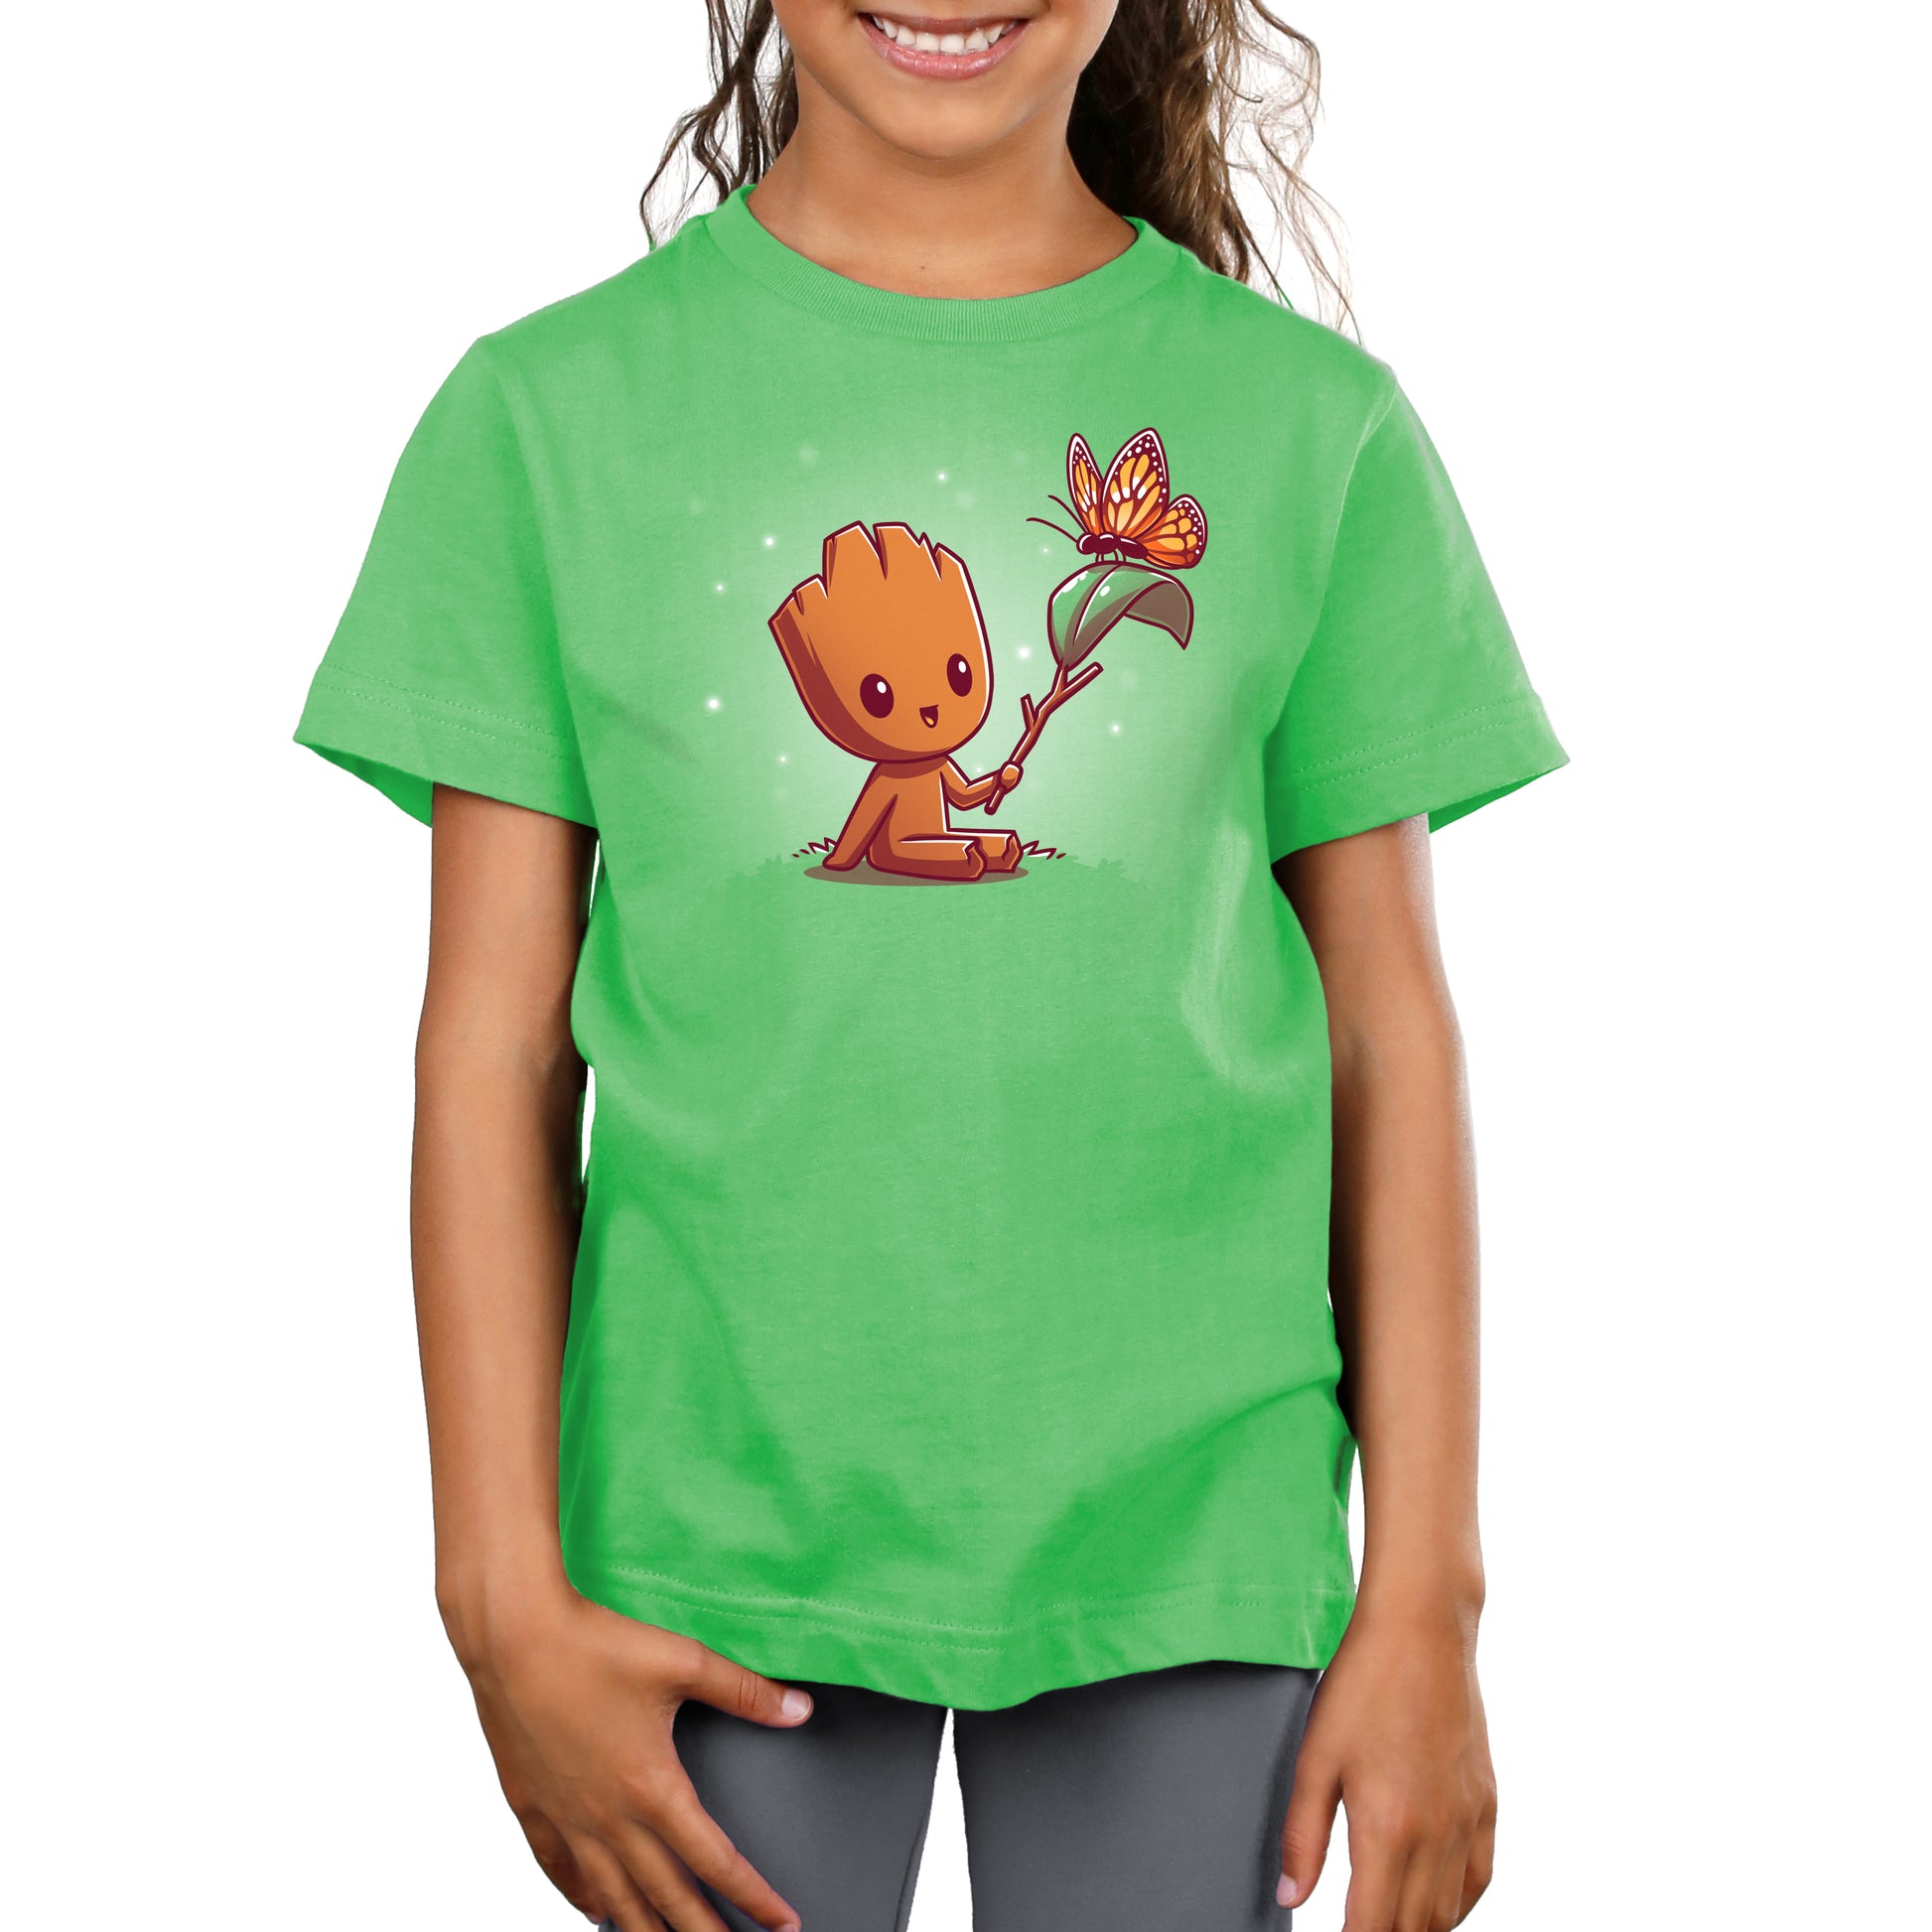 A girl wearing a green t-shirt with a licensed Marvel Lil' Groot design.